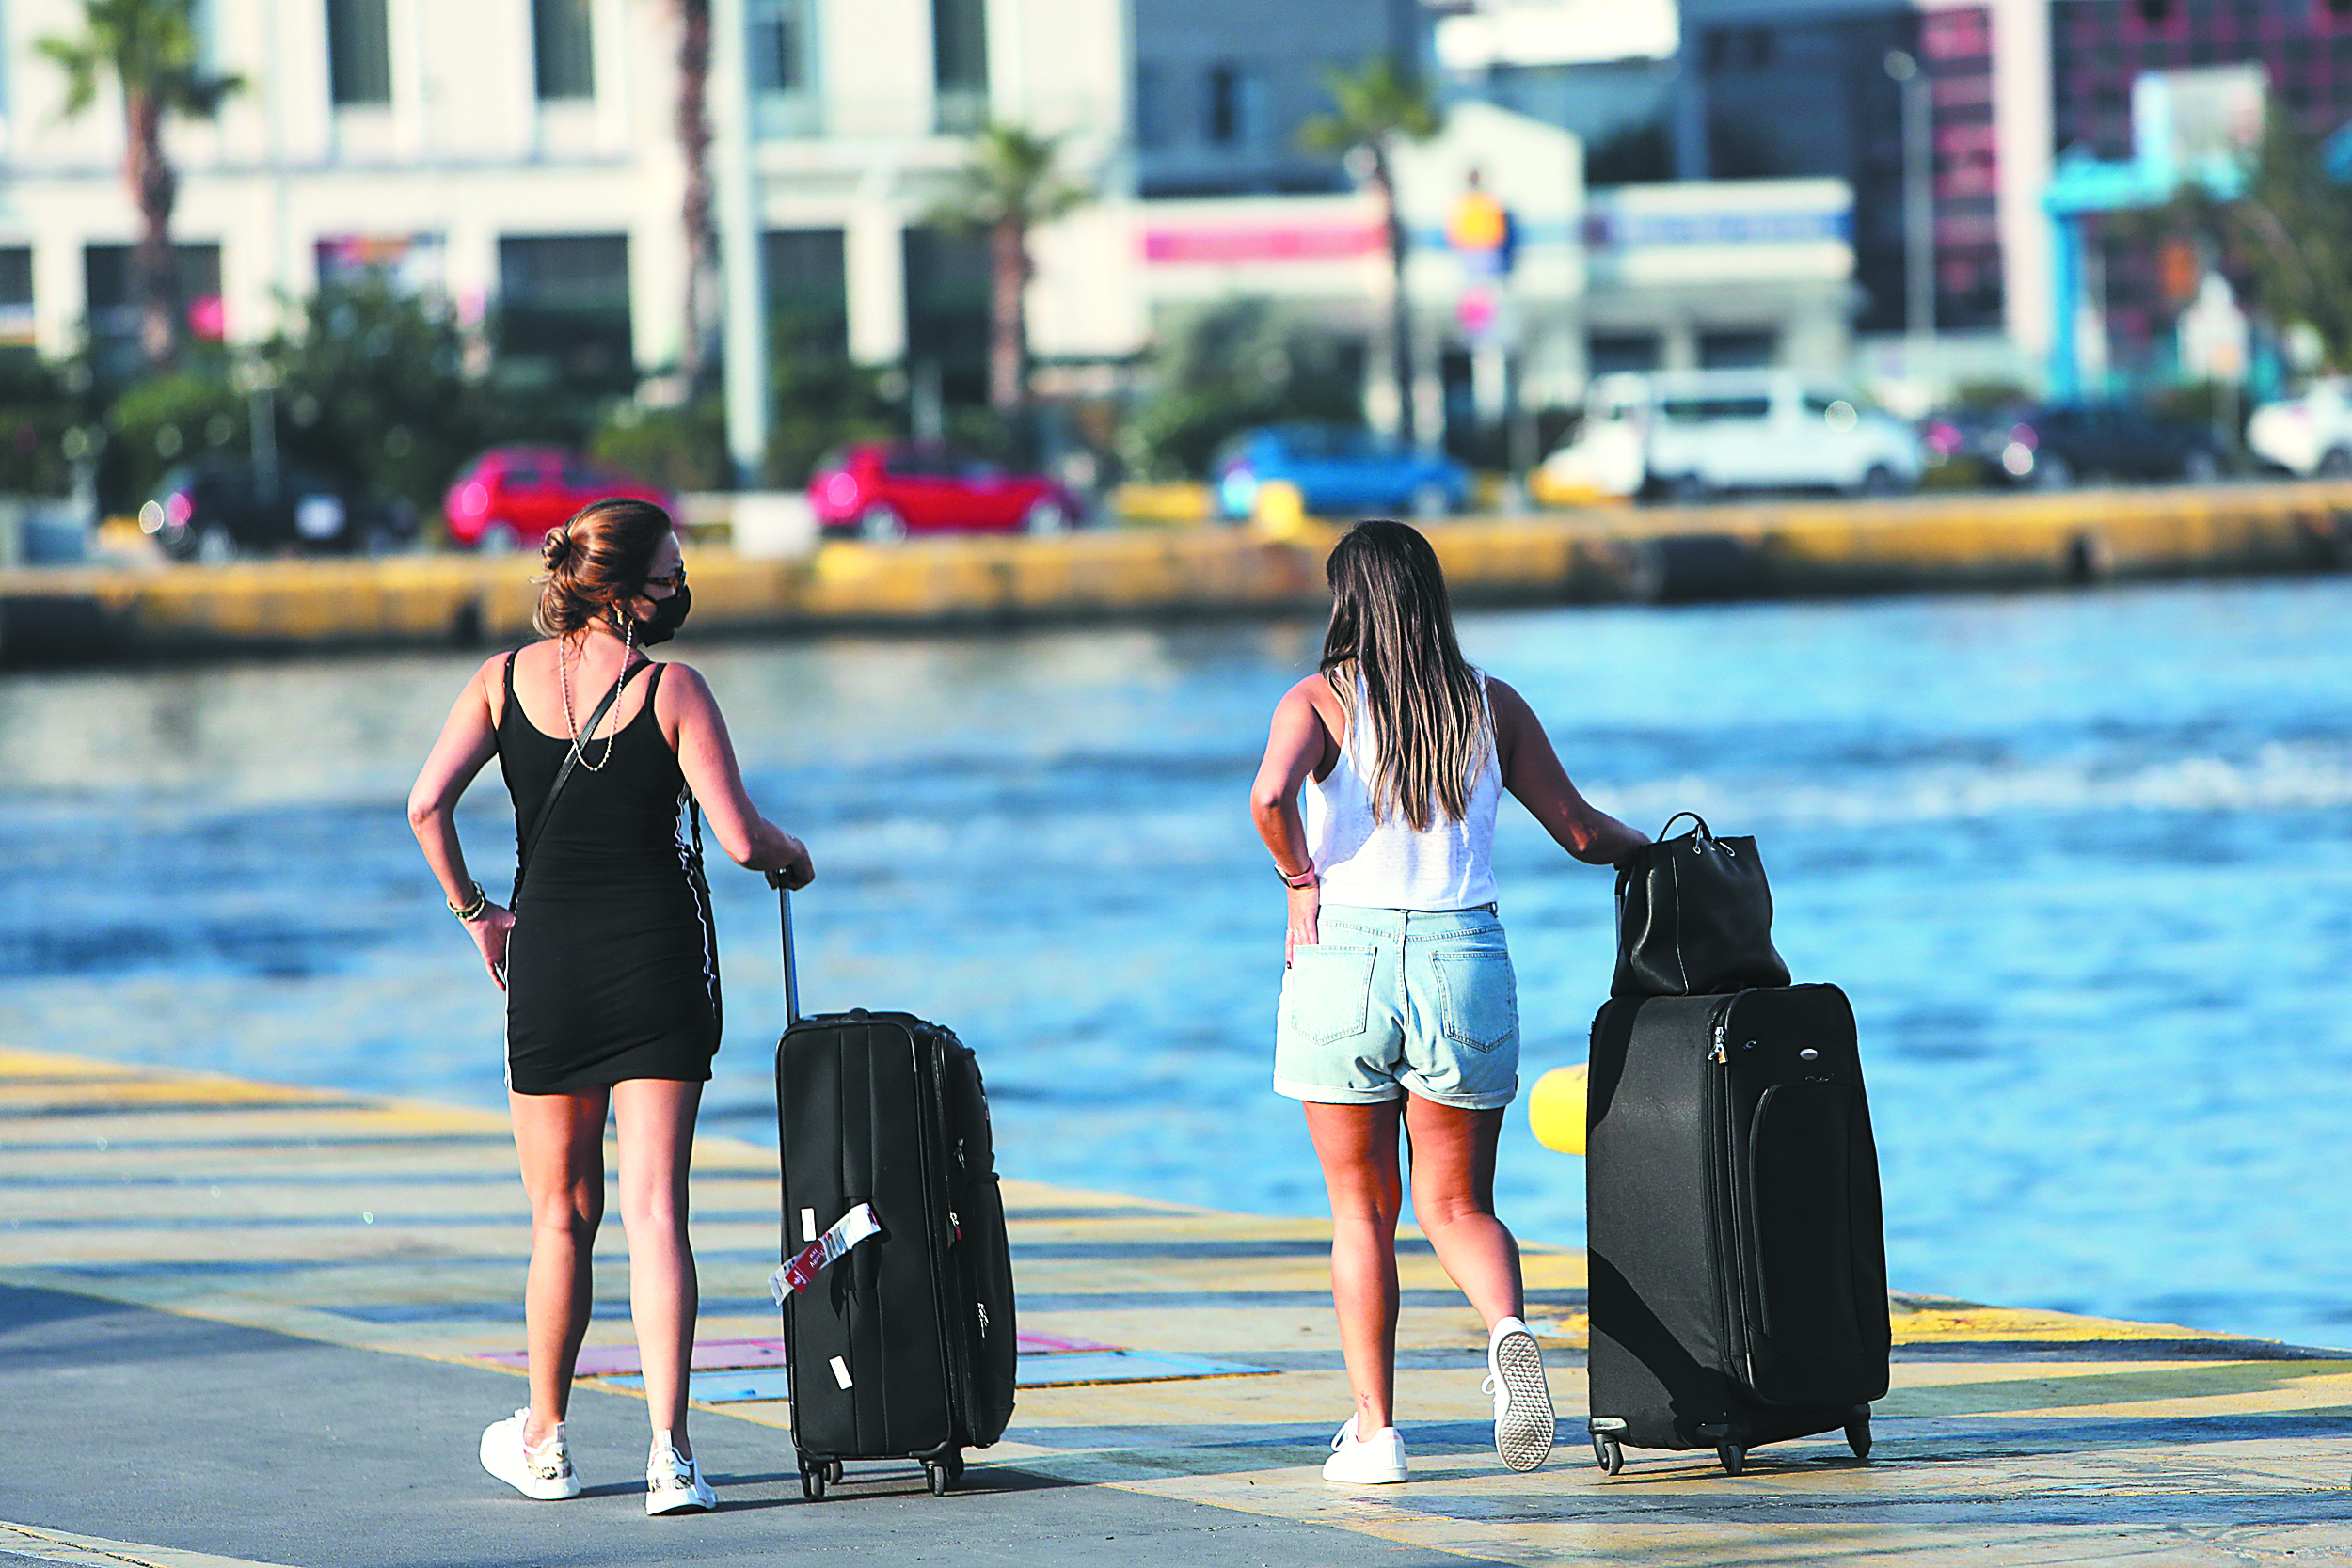 Tourism as a “lifeboat” of the Greek economy in the decade of crisis